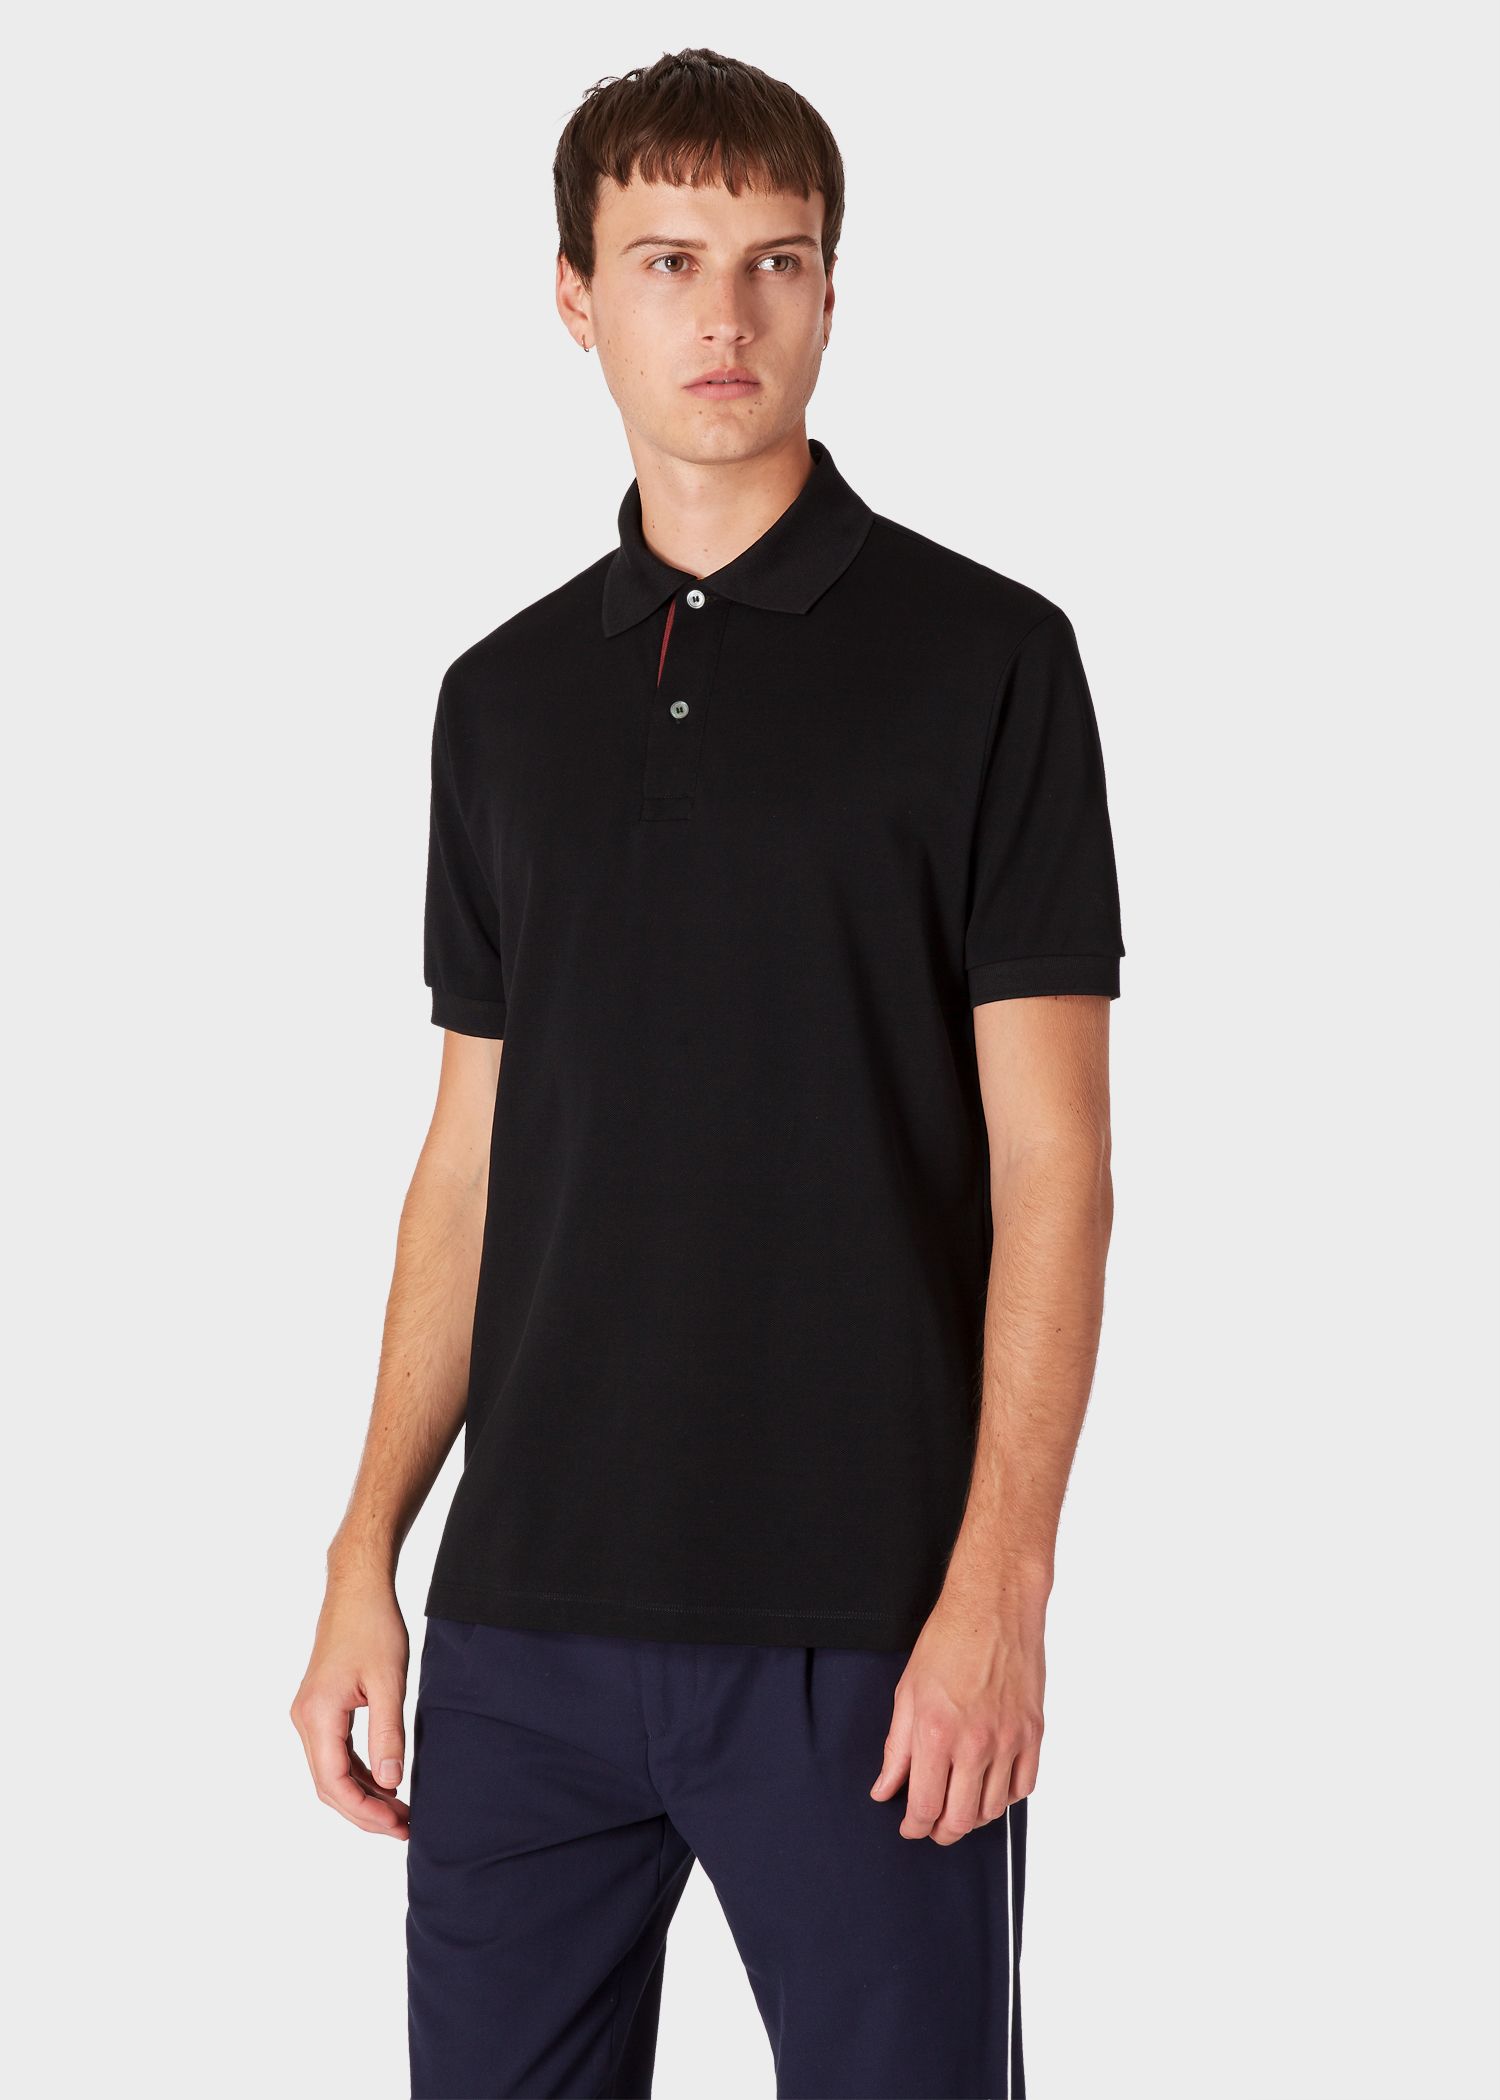 Details about   NWT Paul Smith Mens Moon Man Astronaut Slim Fit Small Polo Shirt Black $145 